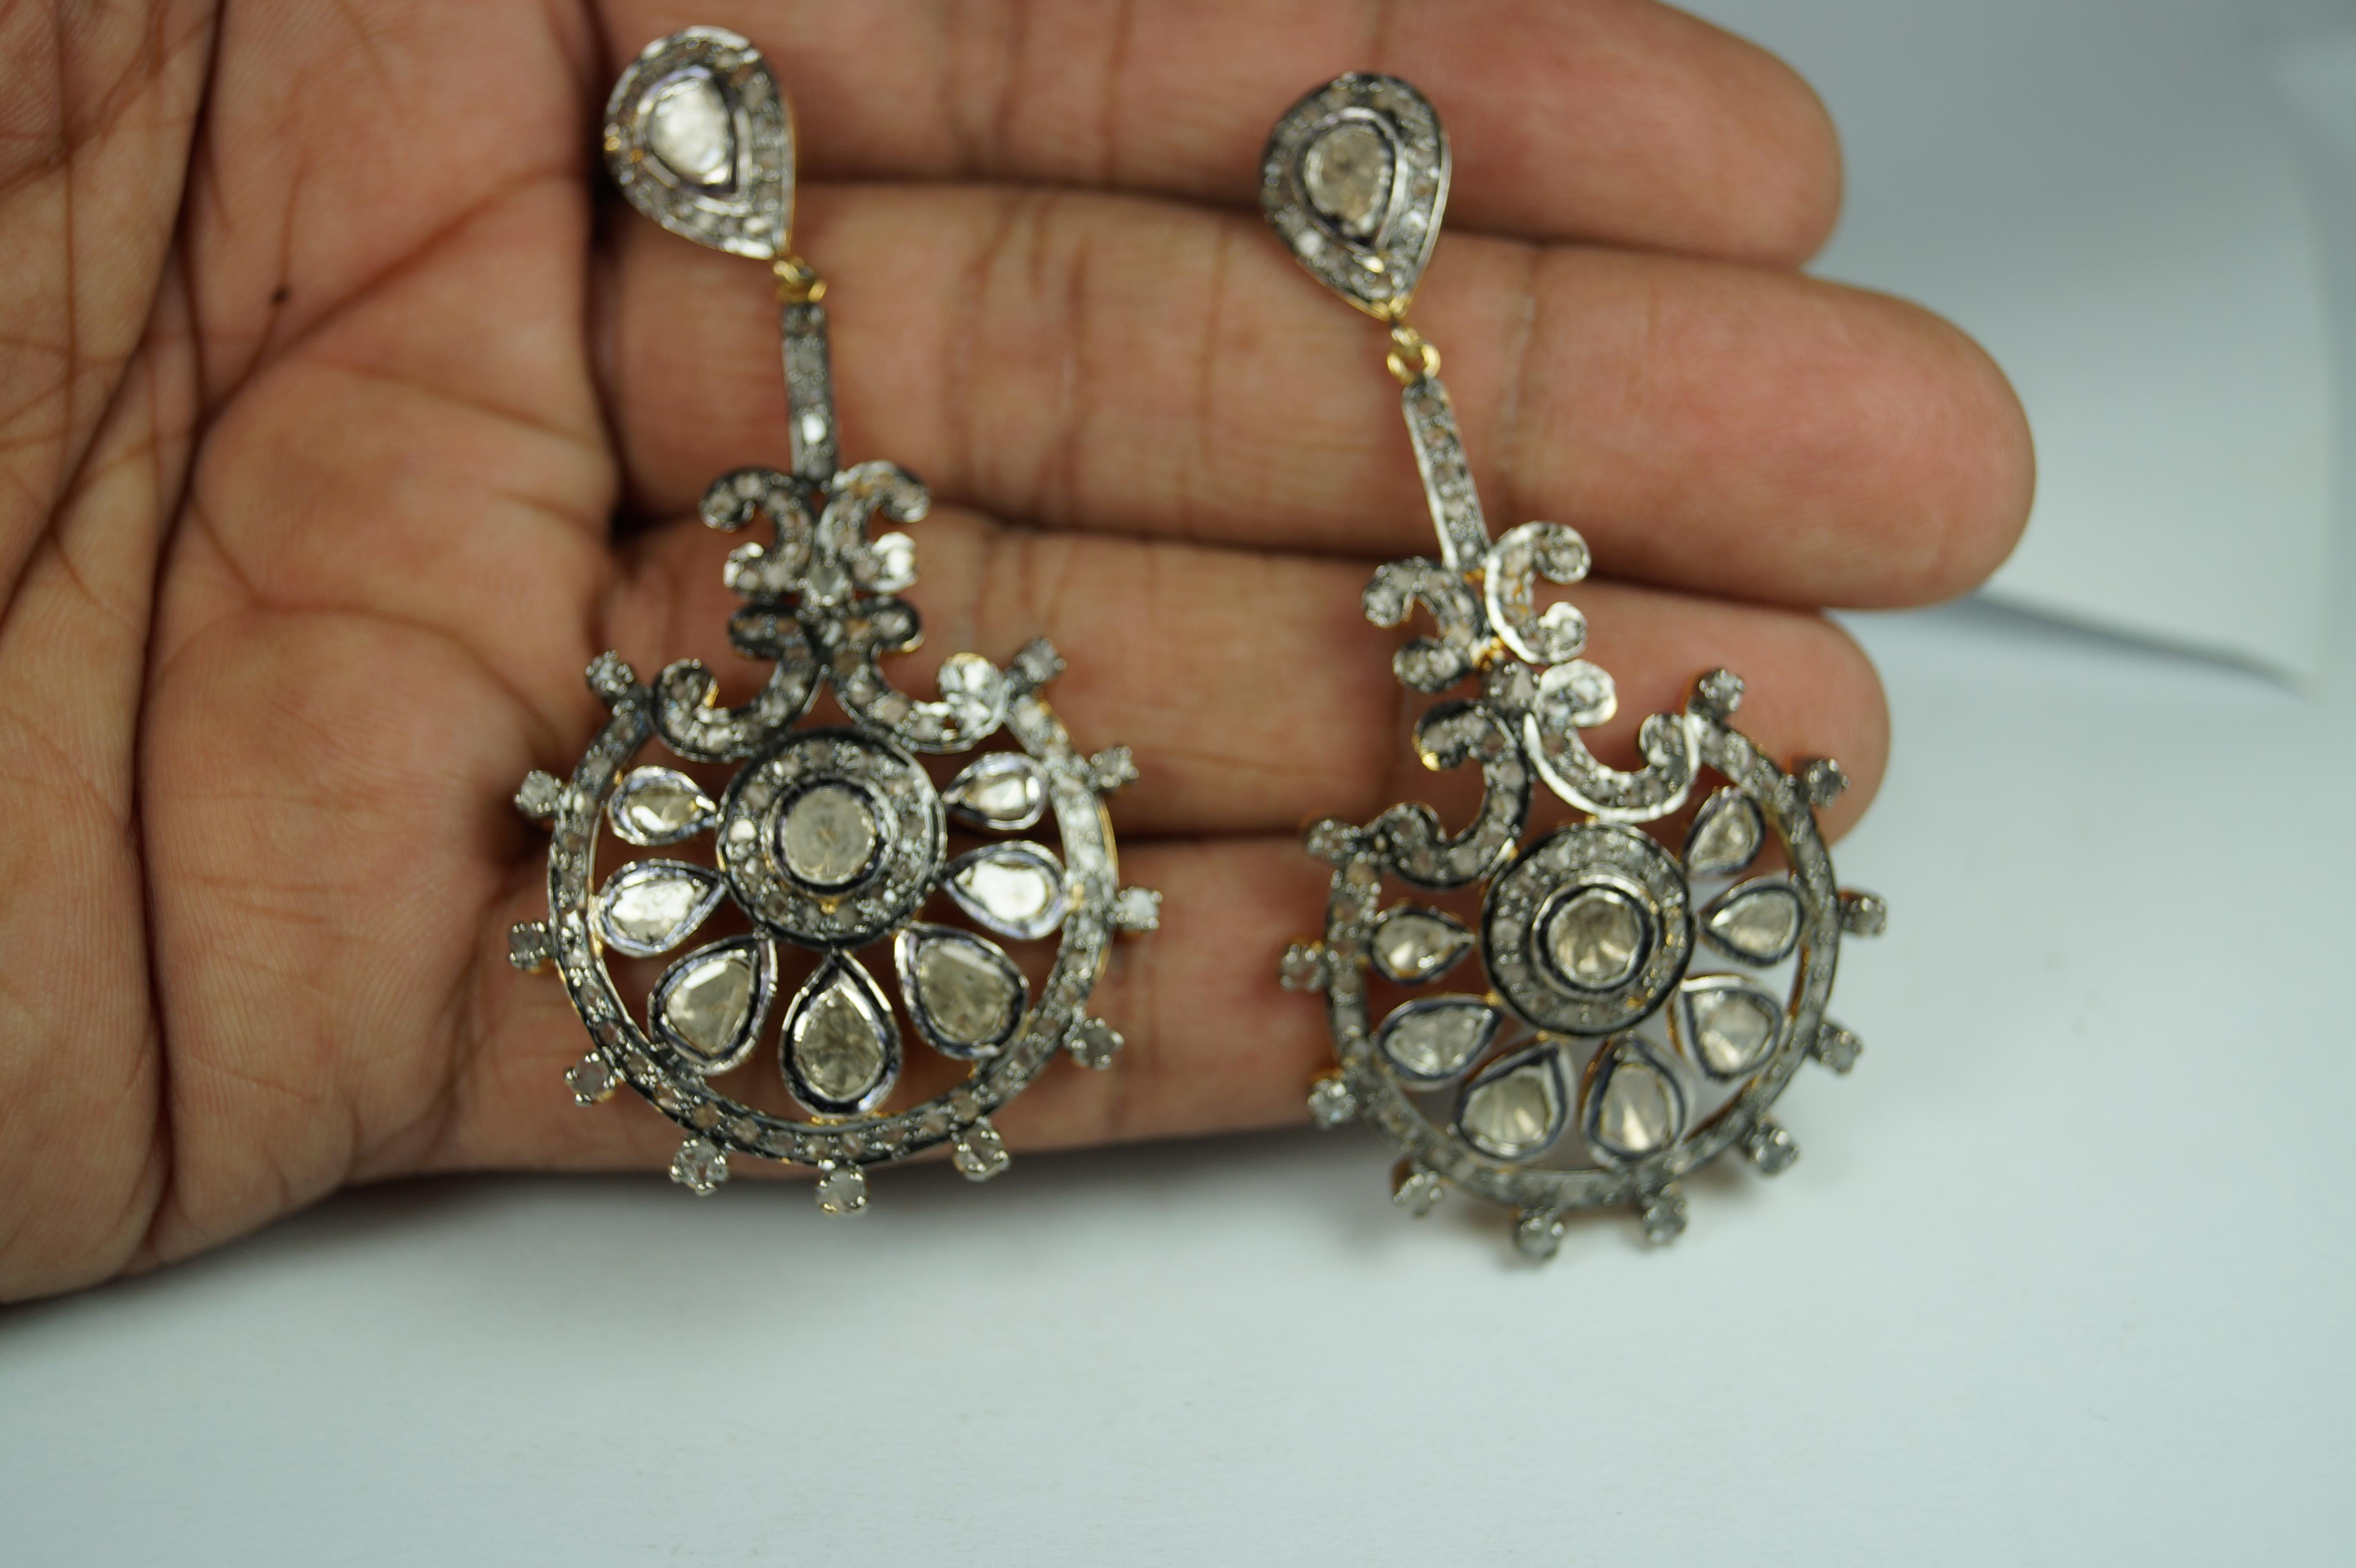 Stunning diamond sterling silver earrings consists of :

Metal- Silver
Metal Purity- sterling silver
Color of metal- oxidized silver look and Yellow gold plating 
Diamond- Natural uncut diamonds and rose cut diamonds
Diamond origin- Natural earth